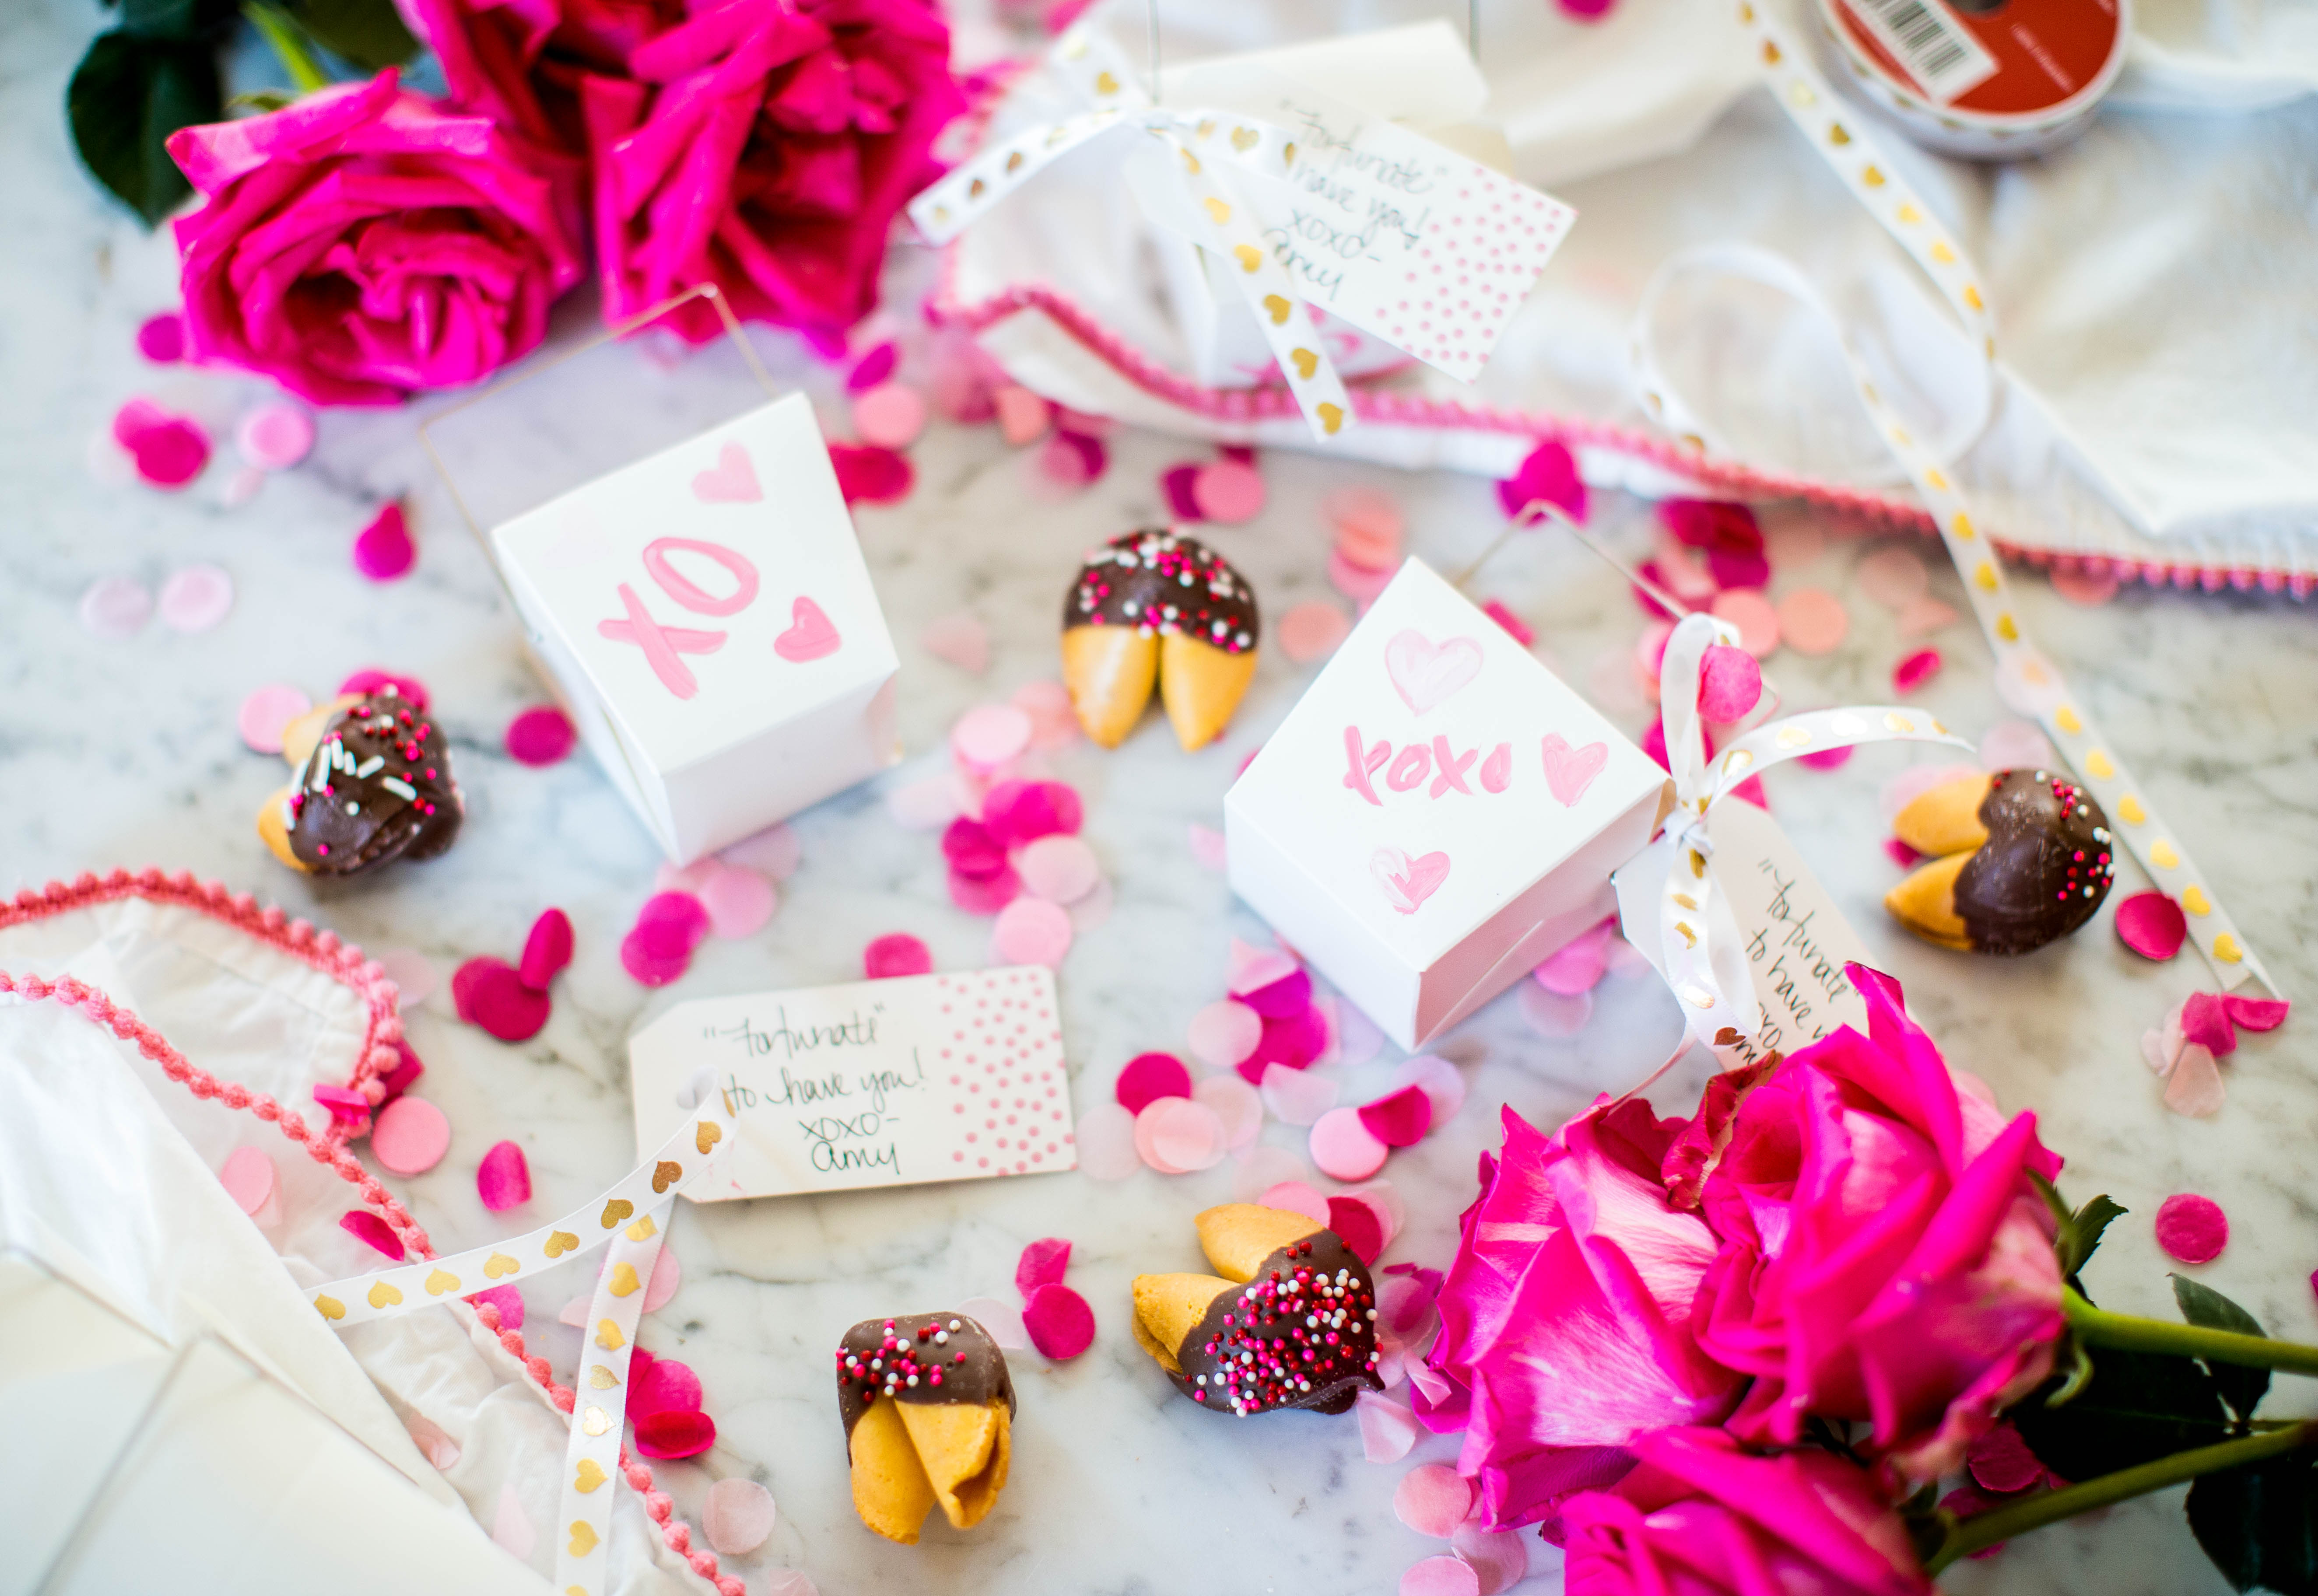 "Fortunate for You" Valentine's DIY and Recipe | coffeebeansandbobbypins.com  | DIY Valentines Fortune Cookie Tutorial featured by top US lifestyle blog, Coffee Beans and Bobby Pins